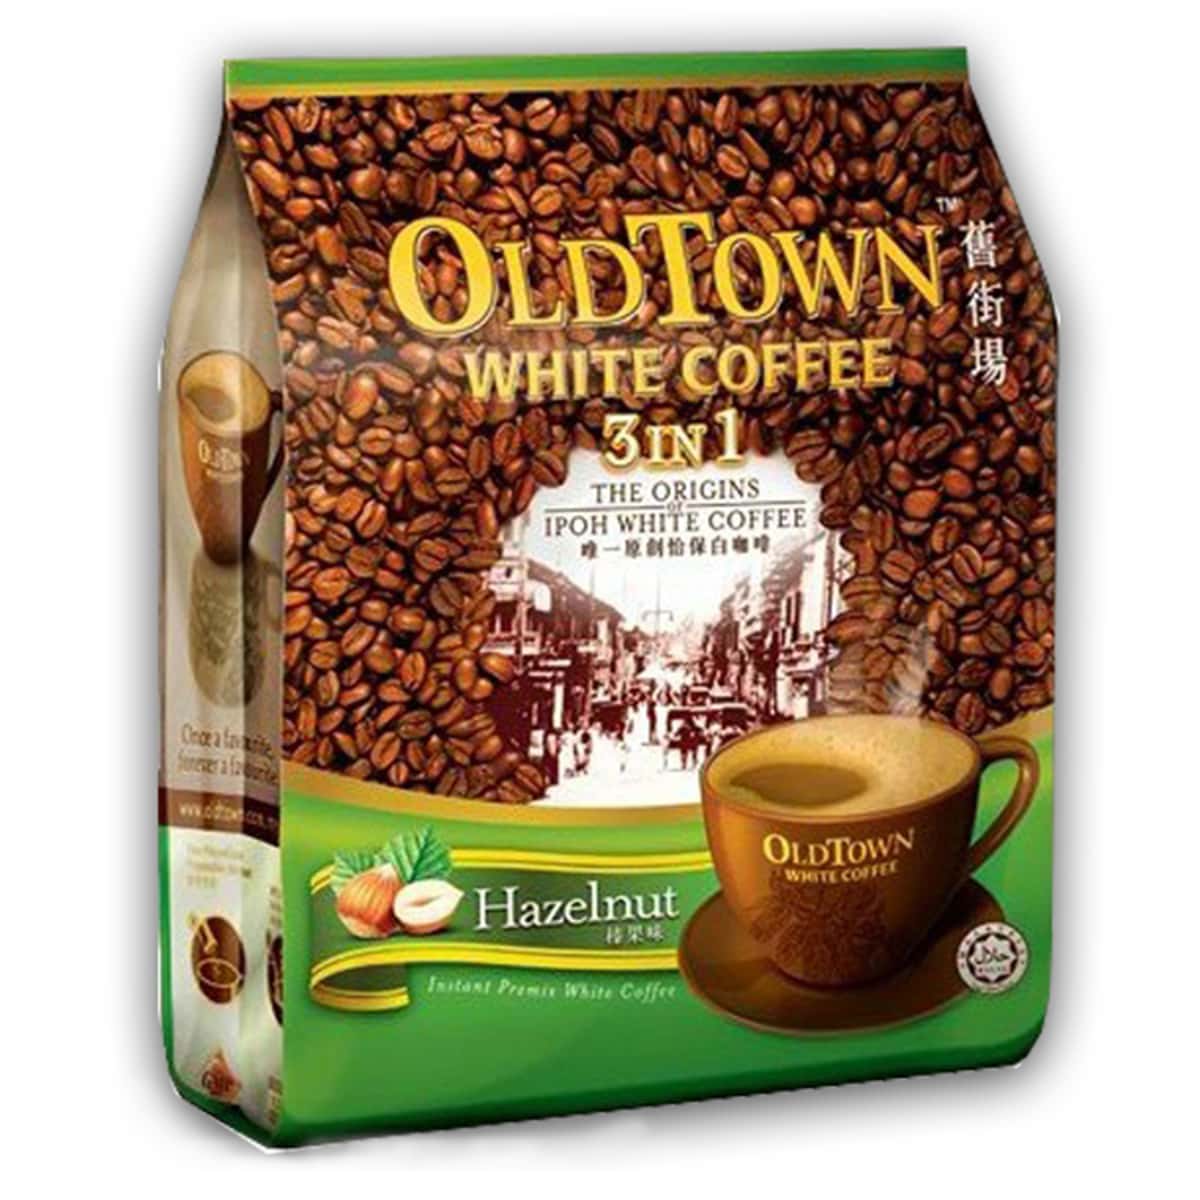 Buy Old Town White Coffee 3 in 1 (Hazelnut Flavour) - 600 gm